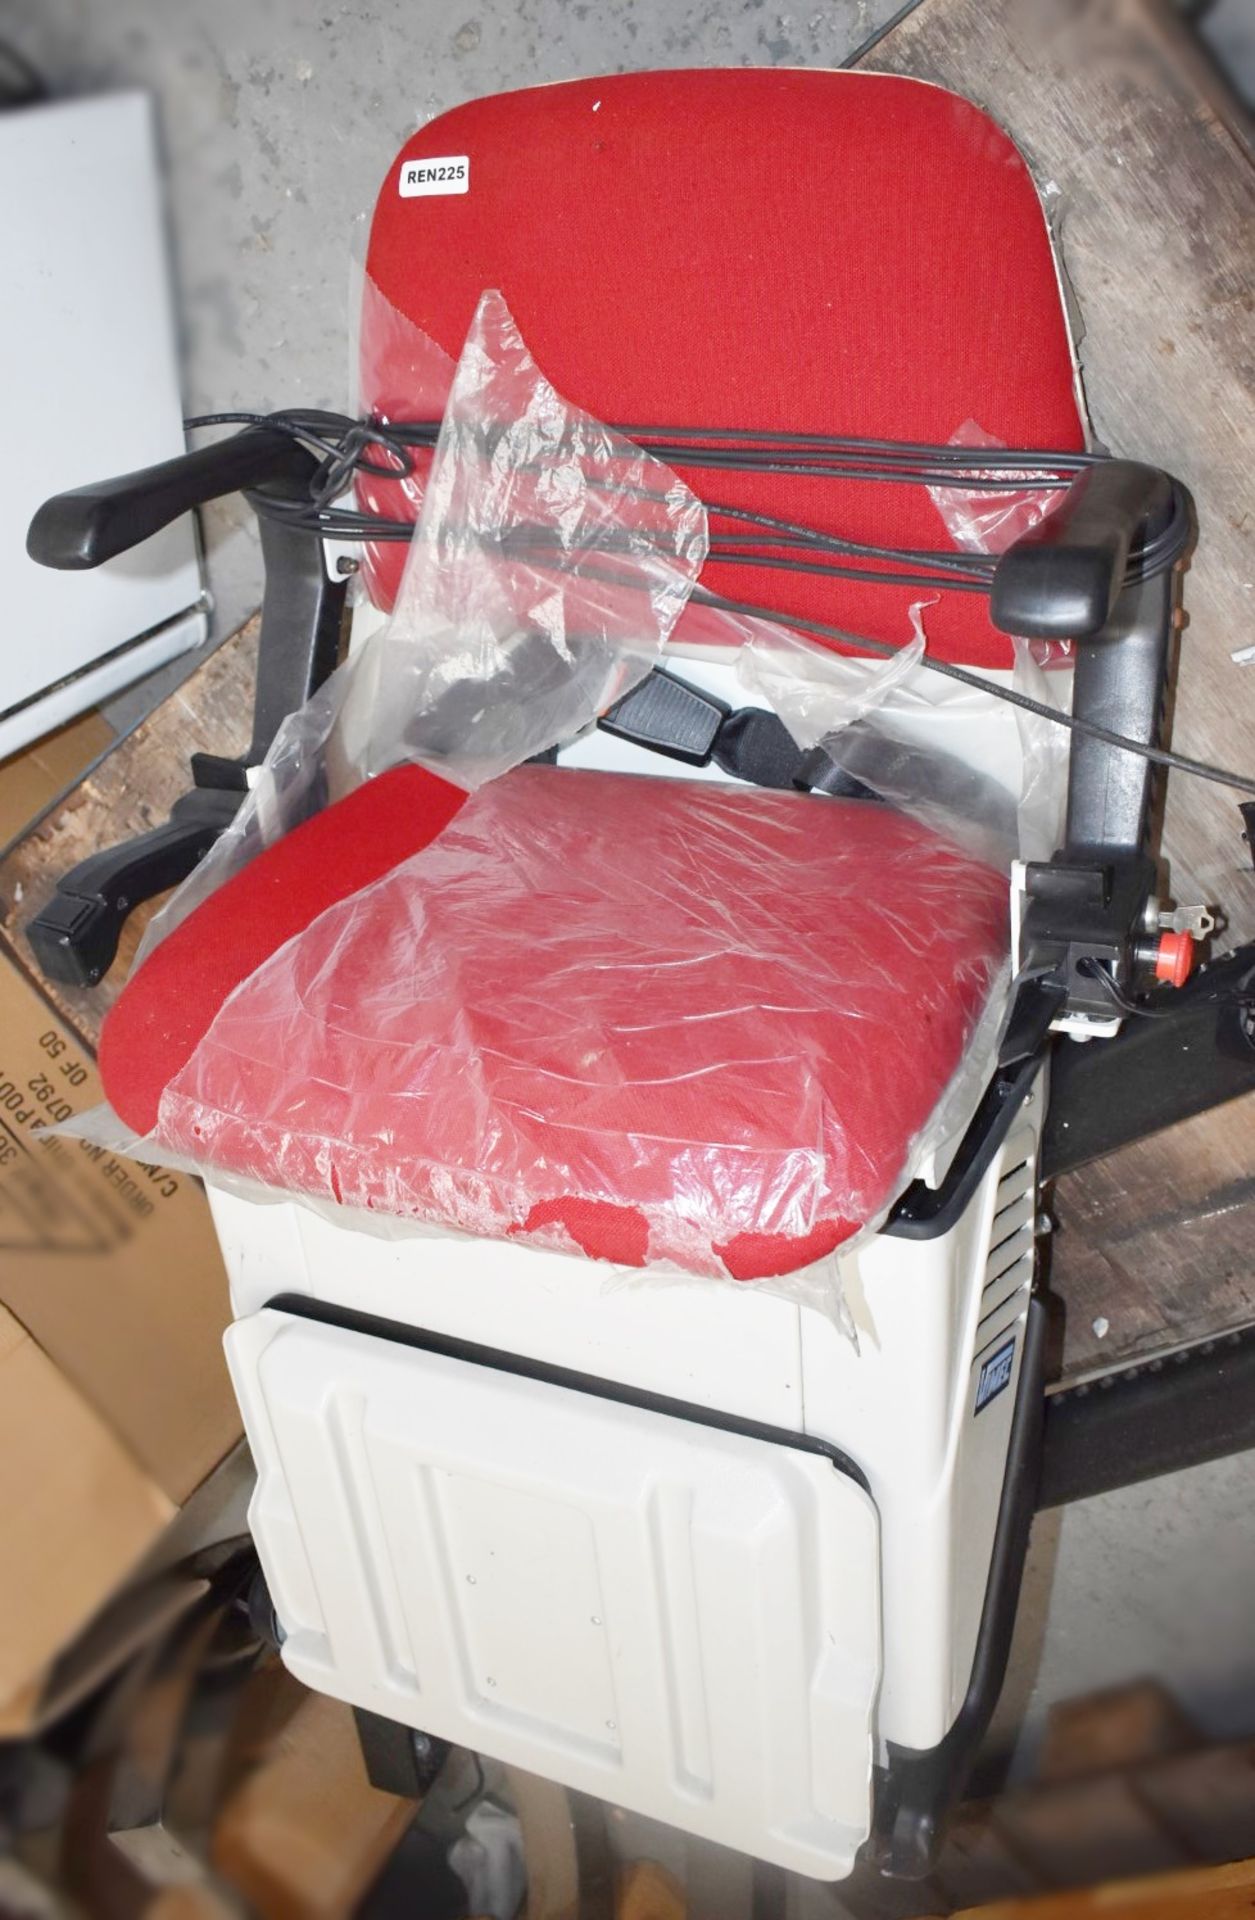 1 x VIMEC Stair Lift with Rail - Preowned, Recently Taken From A Commercial Environment - Image 3 of 4